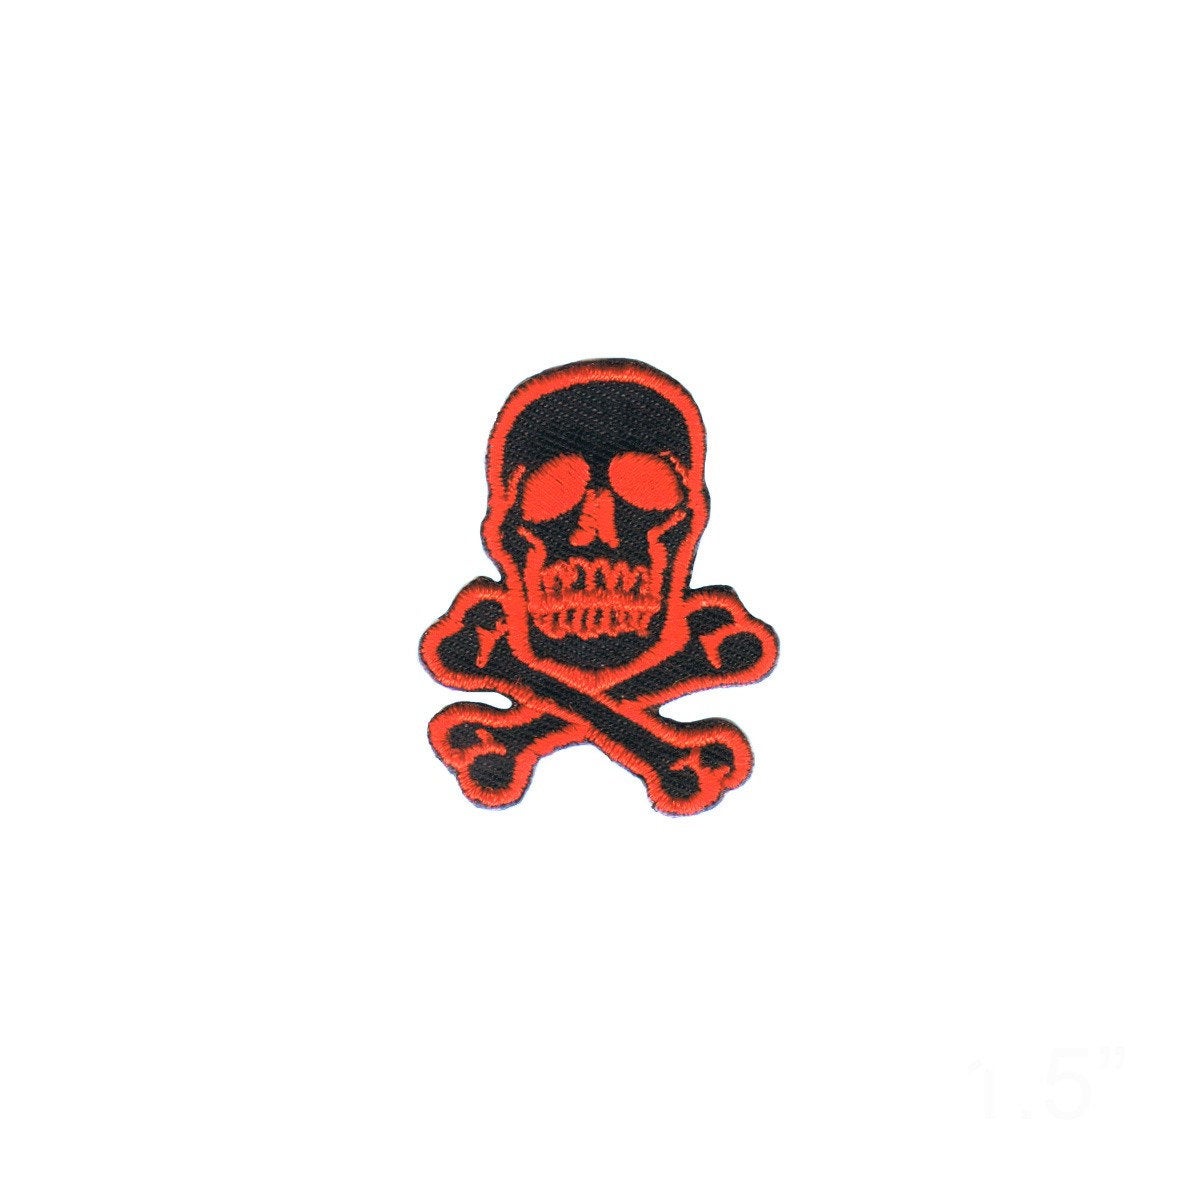  Skull and Crossbones - Embroidered Iron on Patch